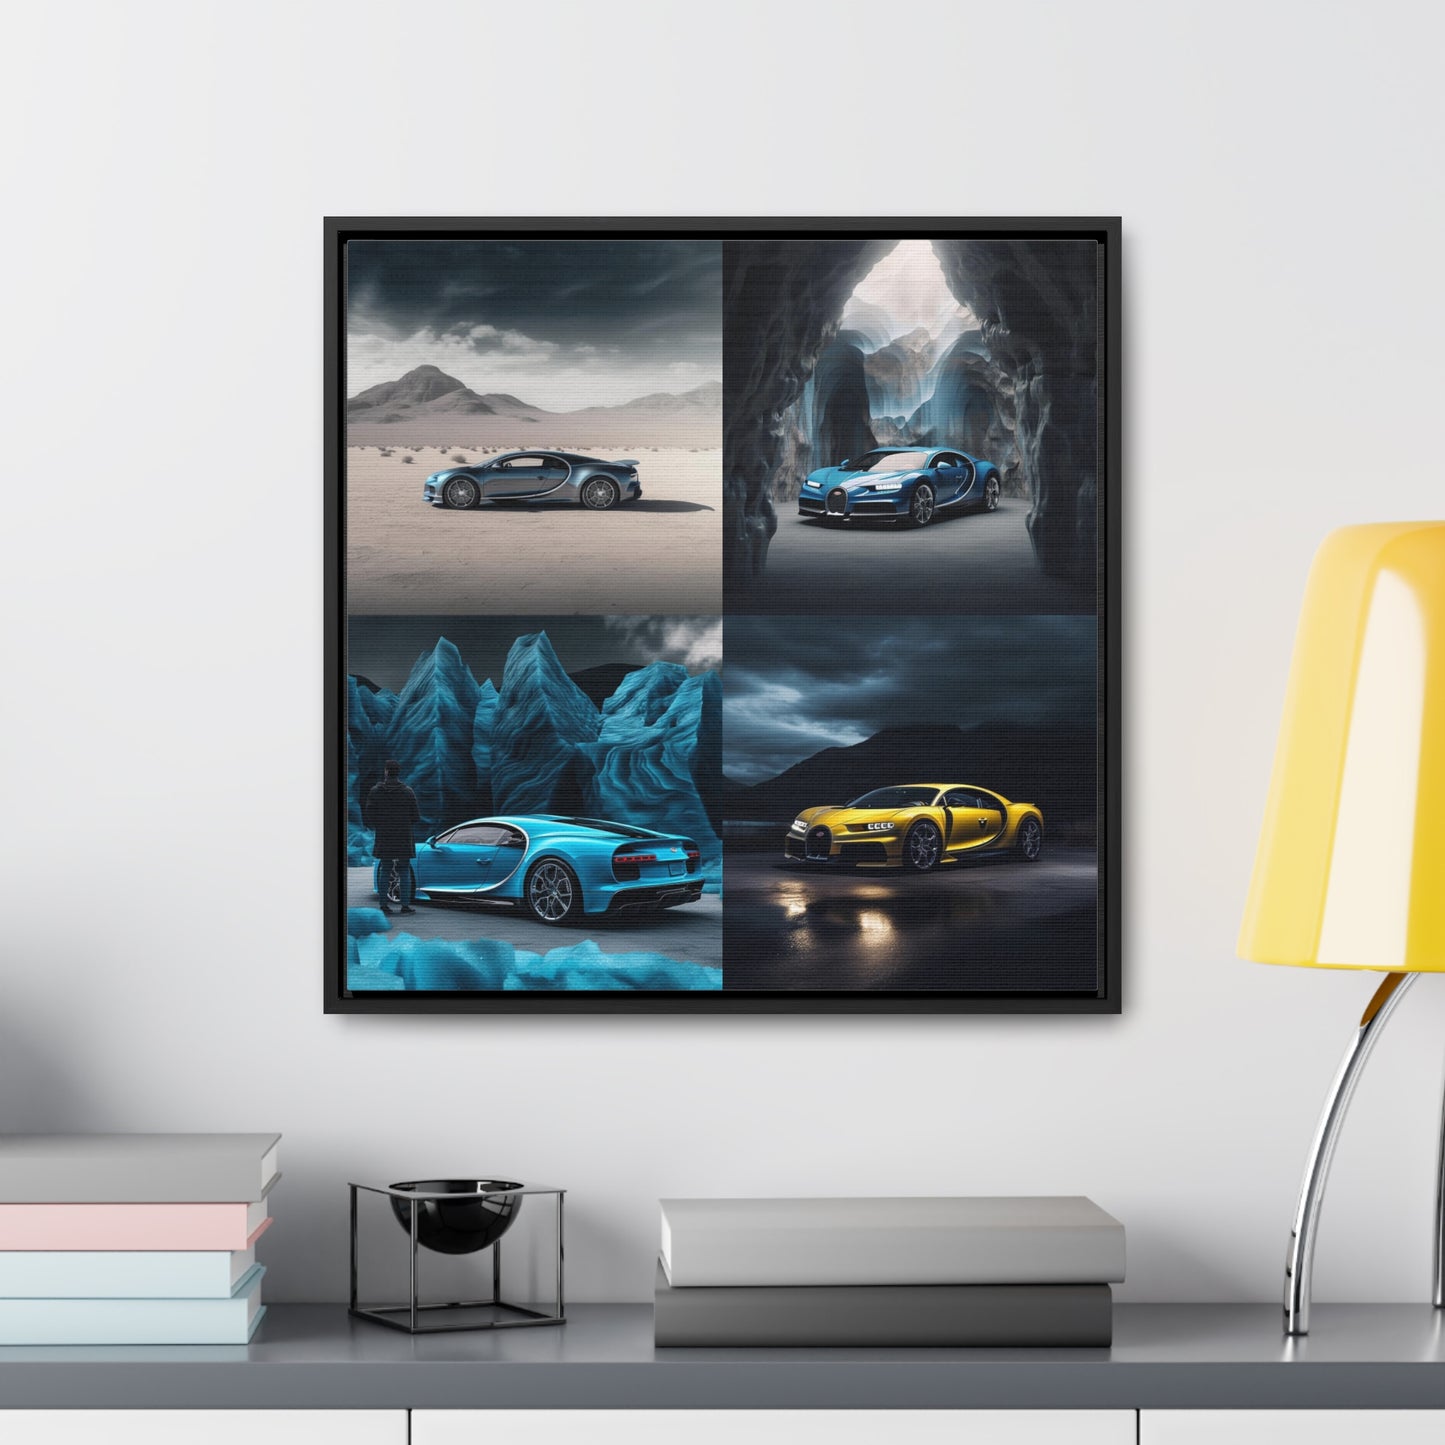 Gallery Canvas Wraps, Square Frame Bugatti Real Look 5